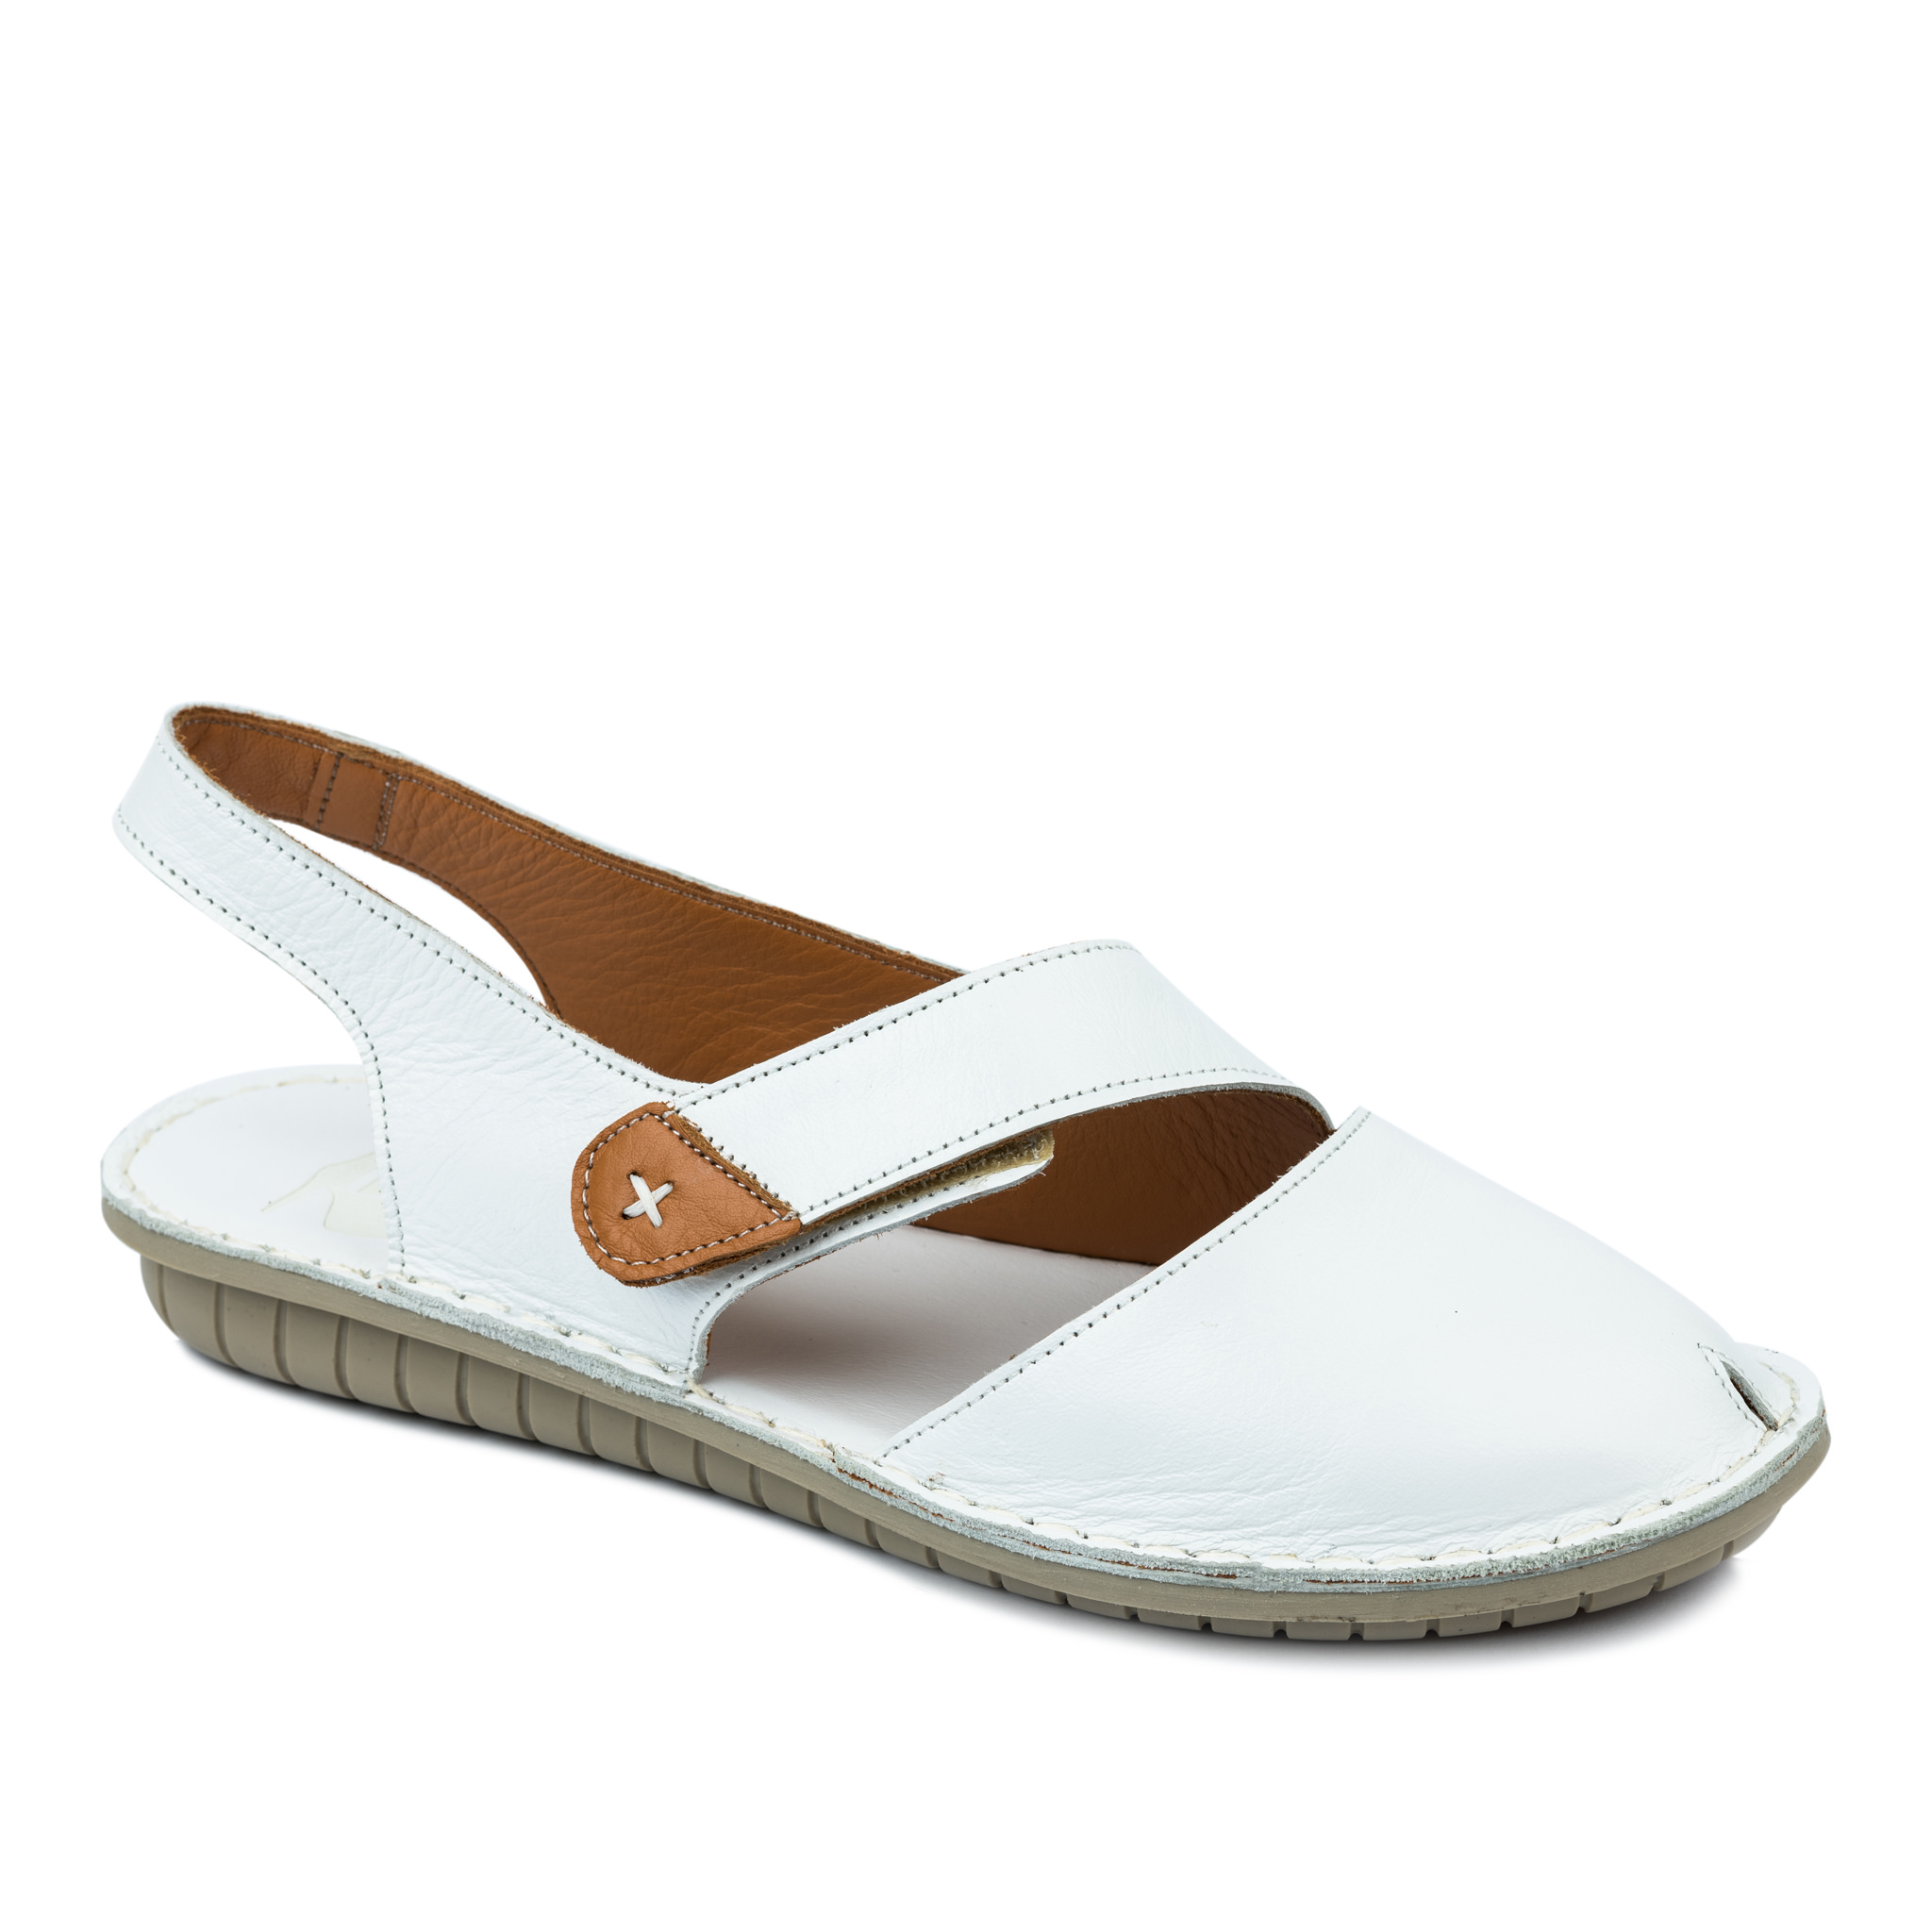 Leather sandals A681 - WHITE